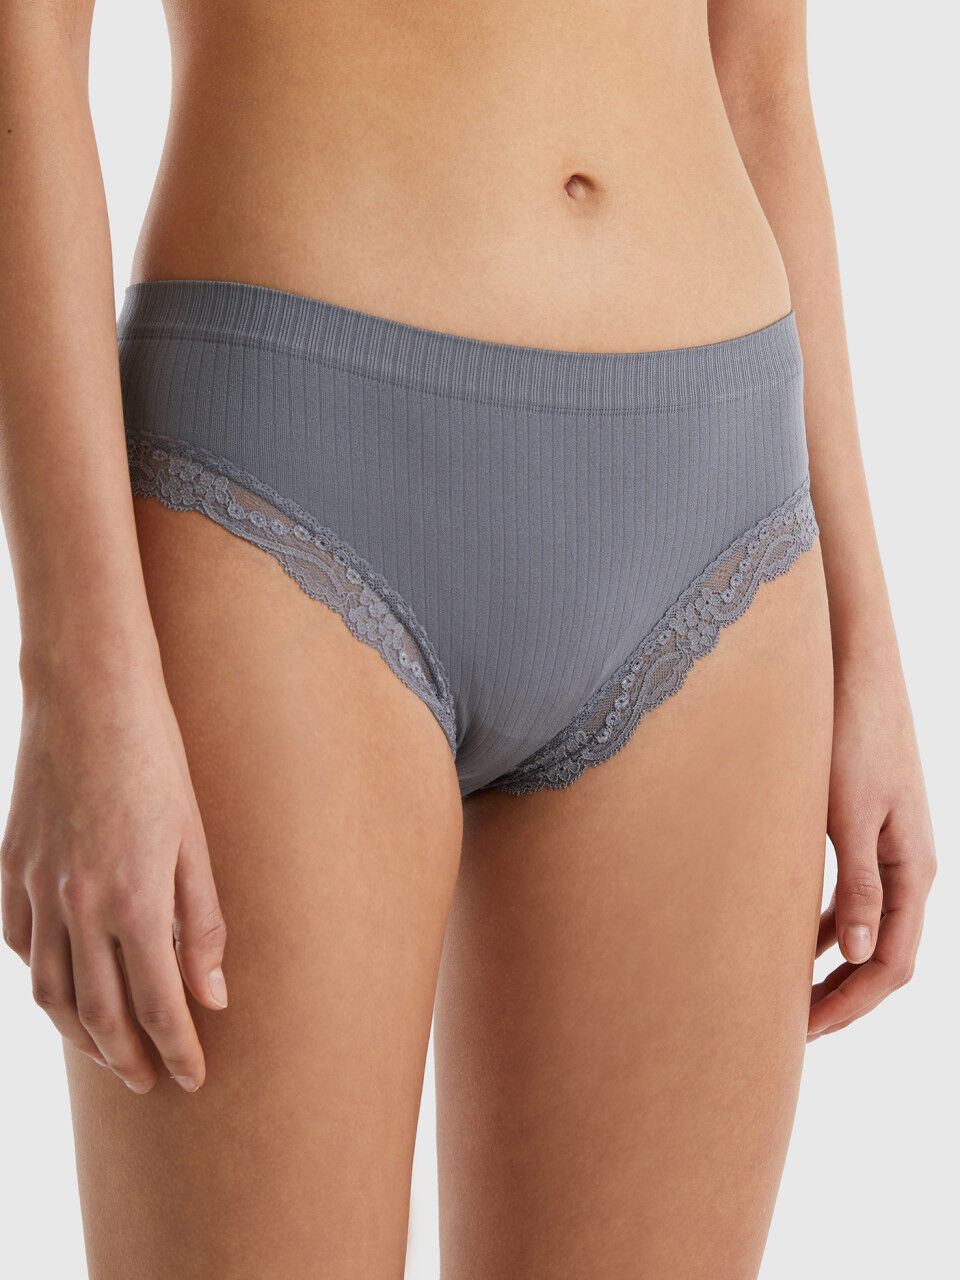 Knit underwear with lace